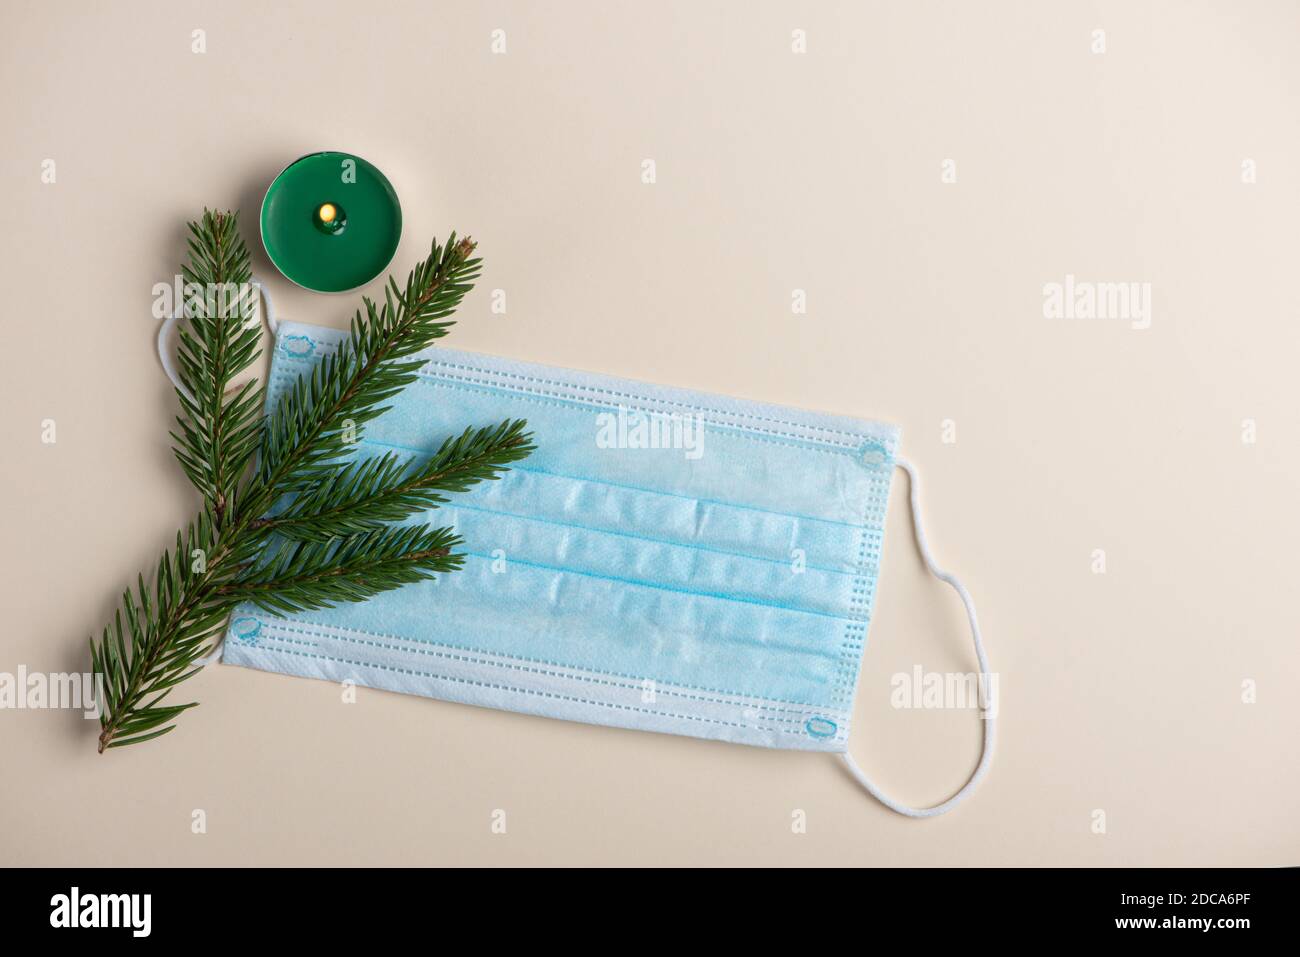 Medical face protective mask, candle and fir twig on a light background. Isolated, top view, flat lay. Stock Photo